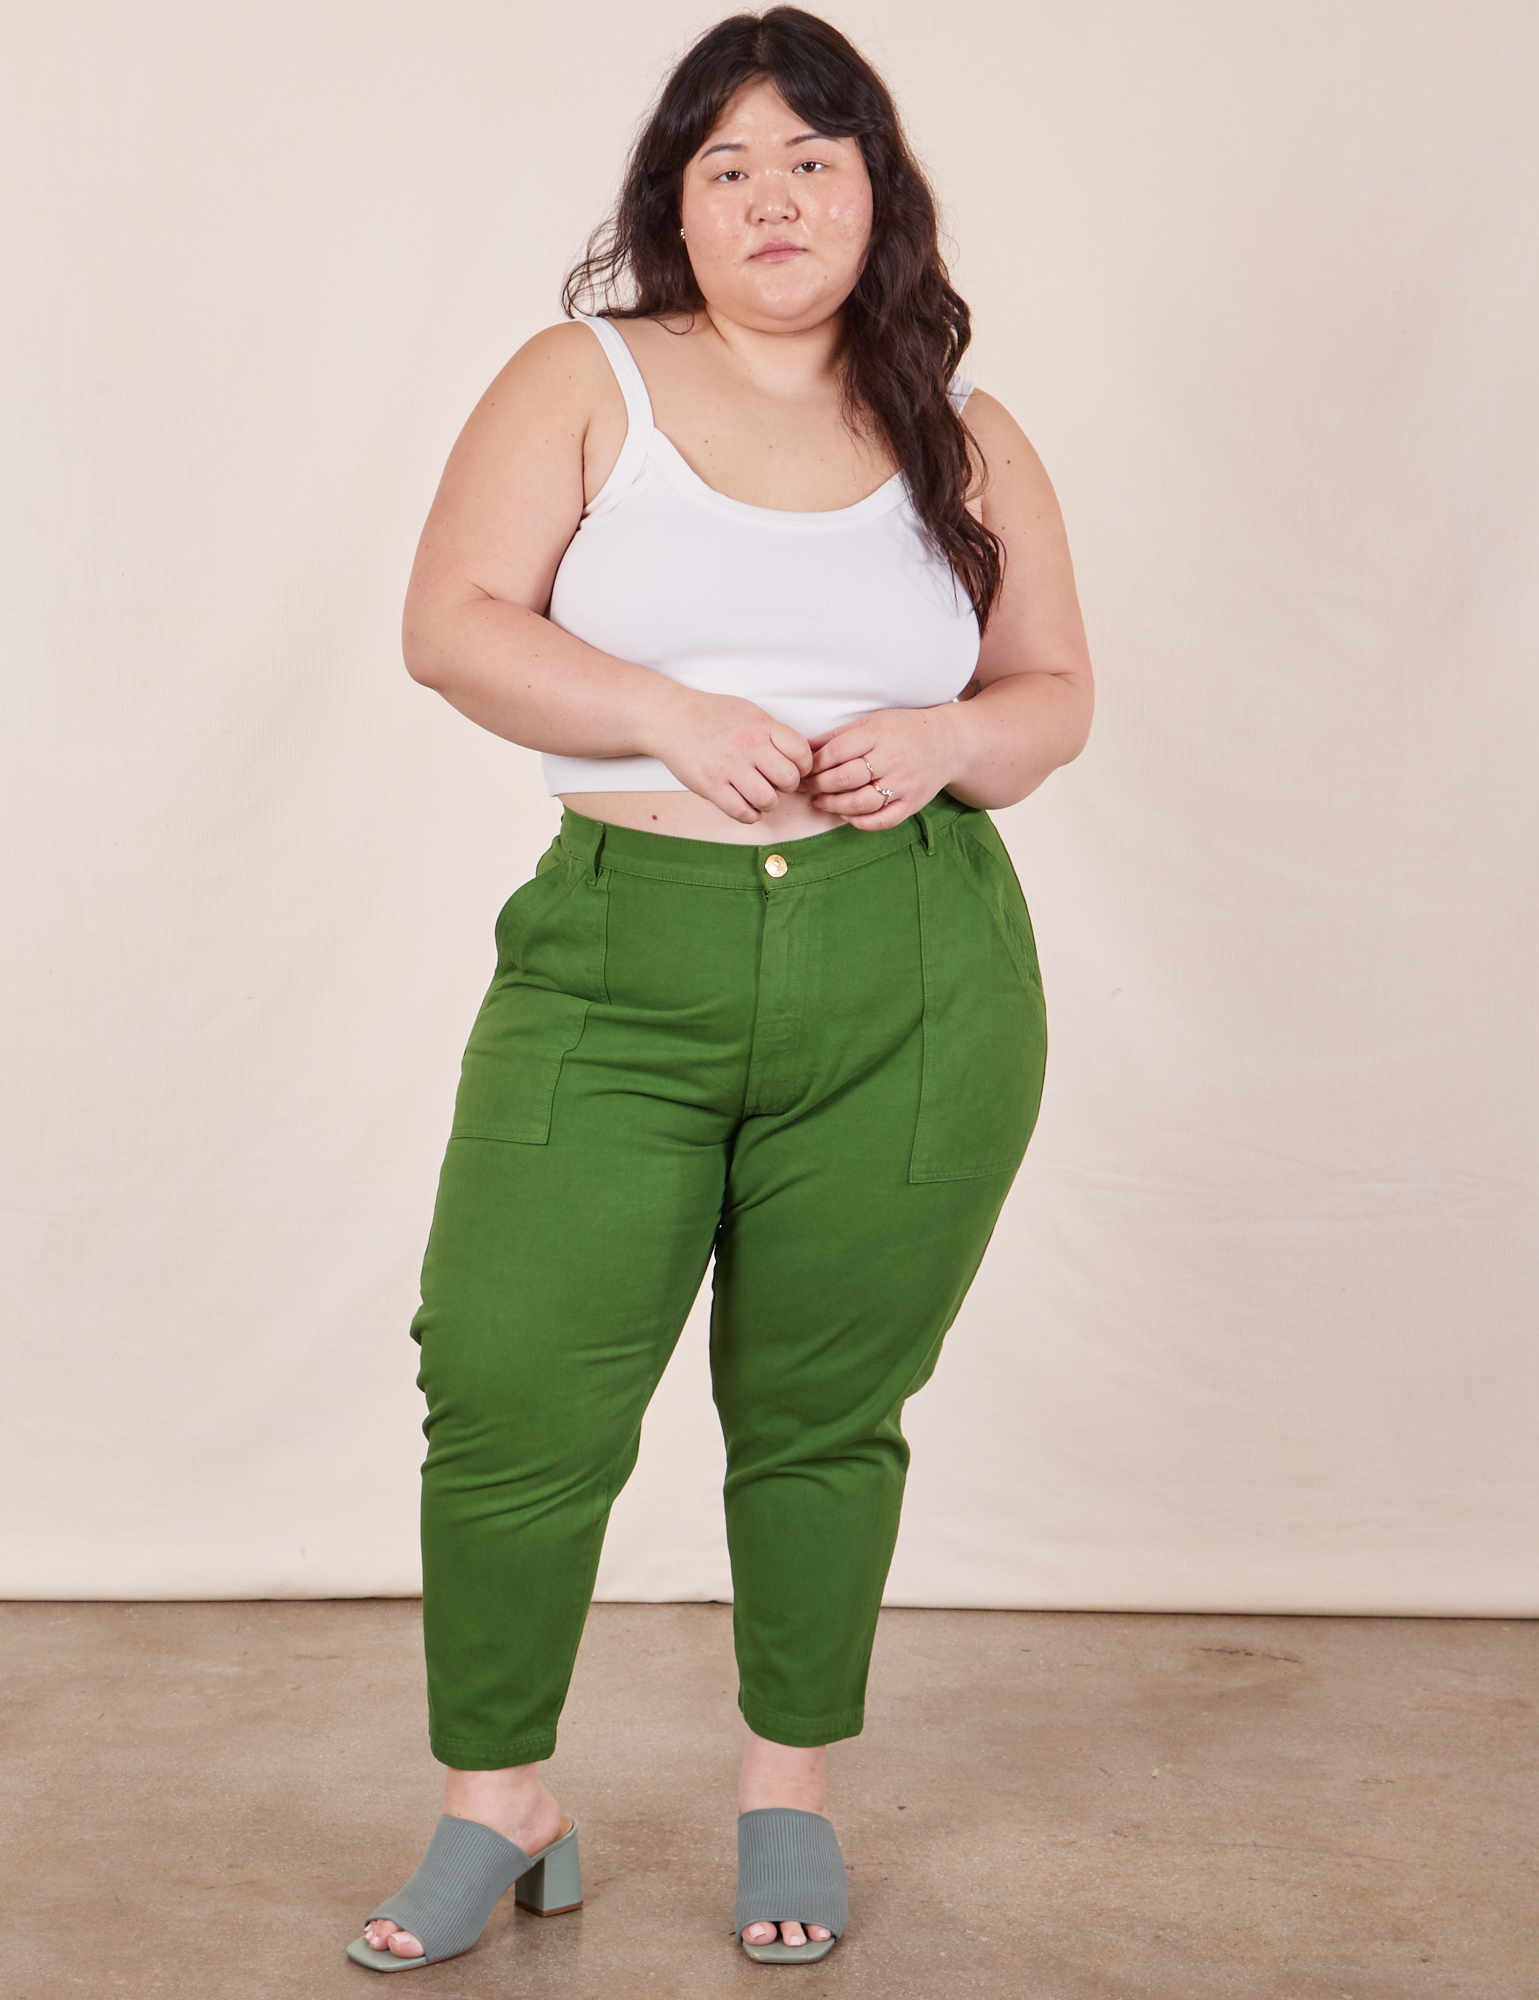 Ashley is 5&#39;7&quot; and wearing 1XL Petite Pencil Pants in Lawn Green paired with vintage off-white Cami